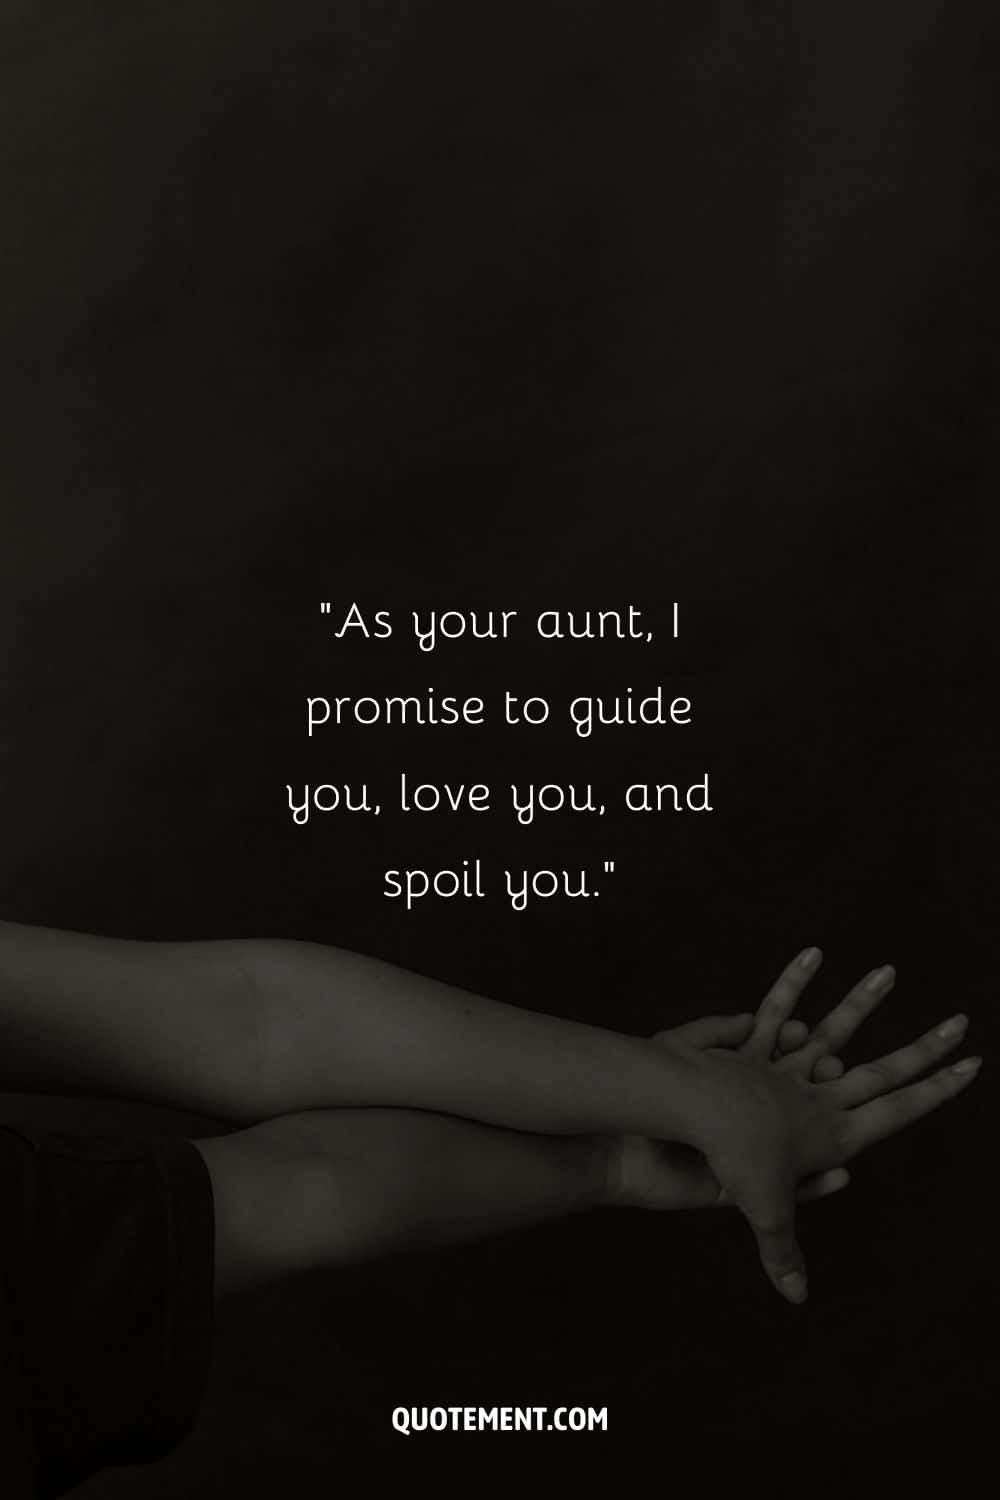 Aunt's grasp offers reassurance to her nephew.